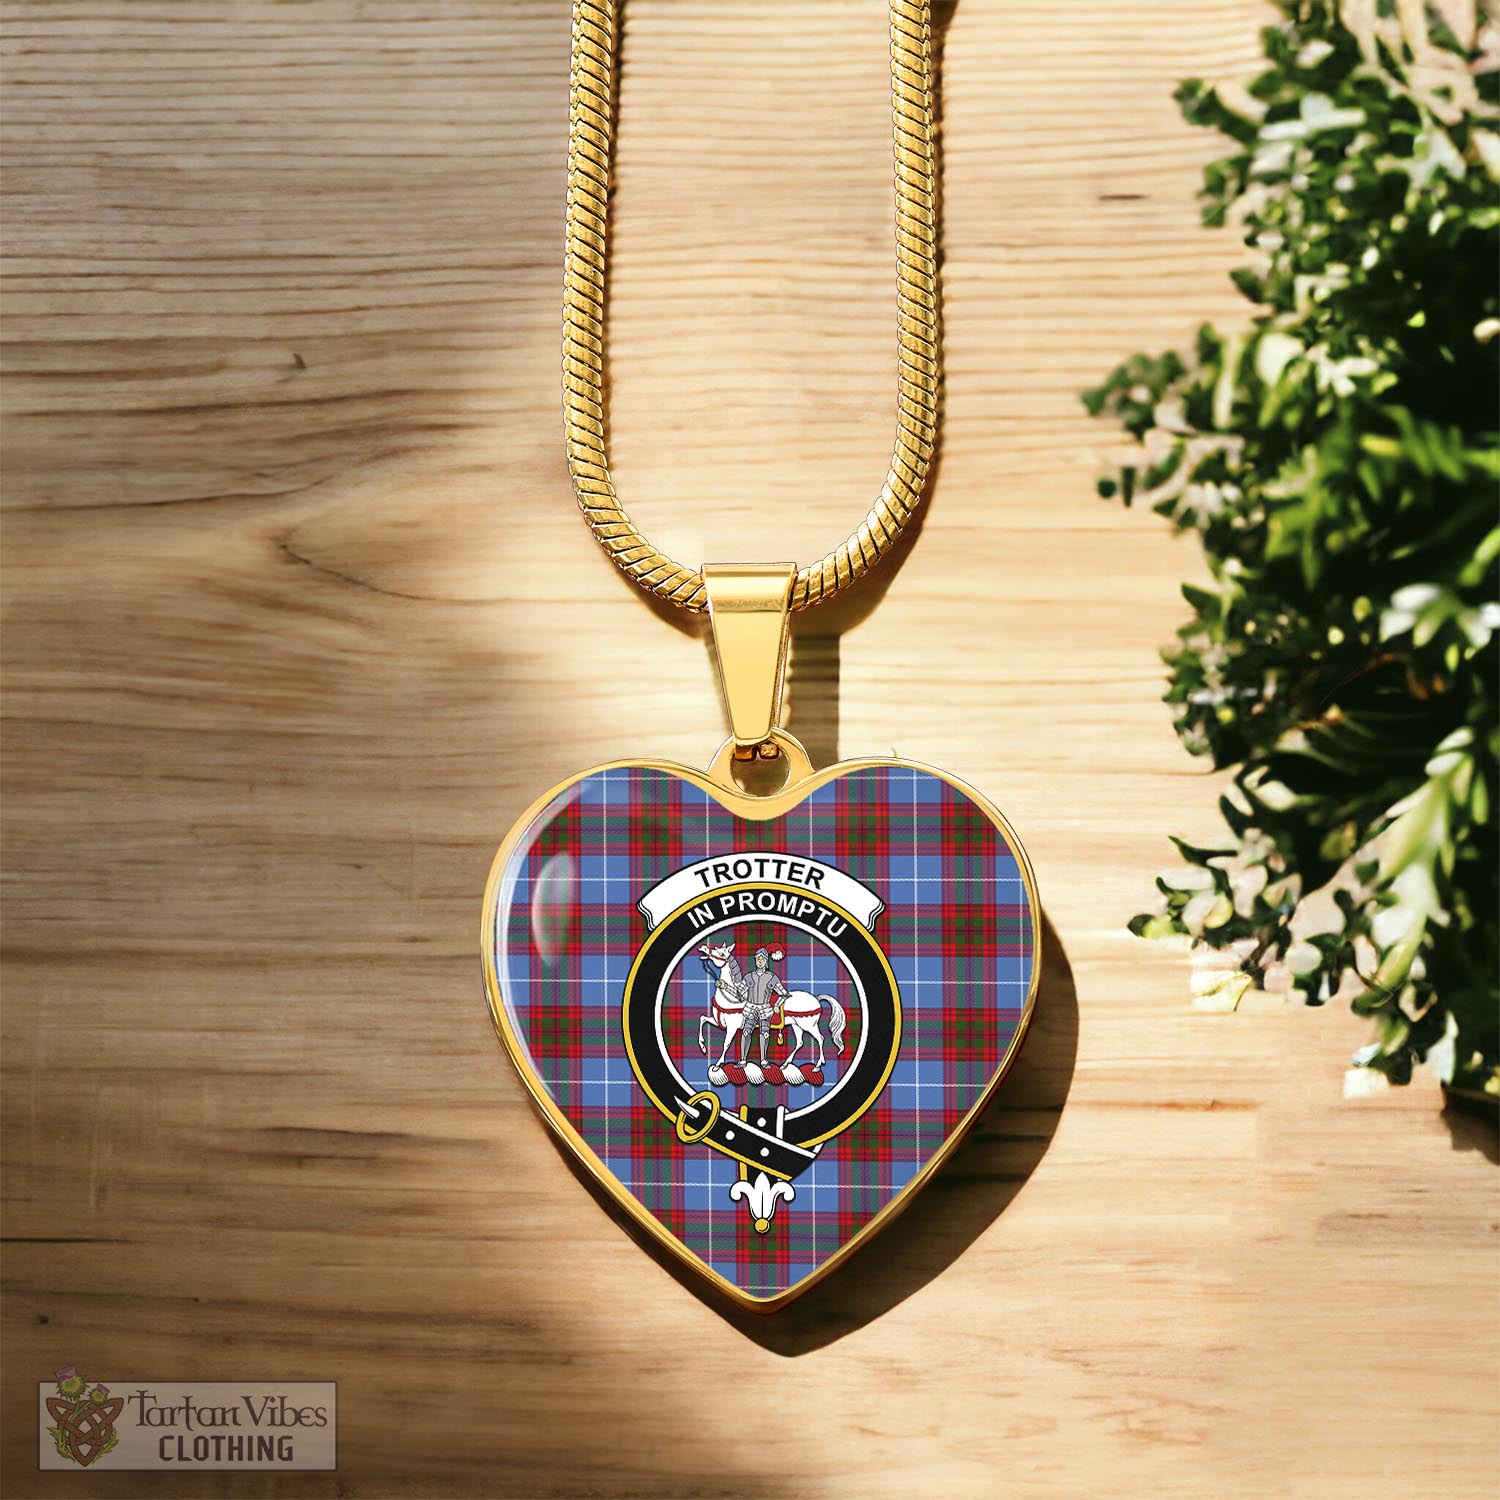 Tartan Vibes Clothing Trotter Tartan Heart Necklace with Family Crest